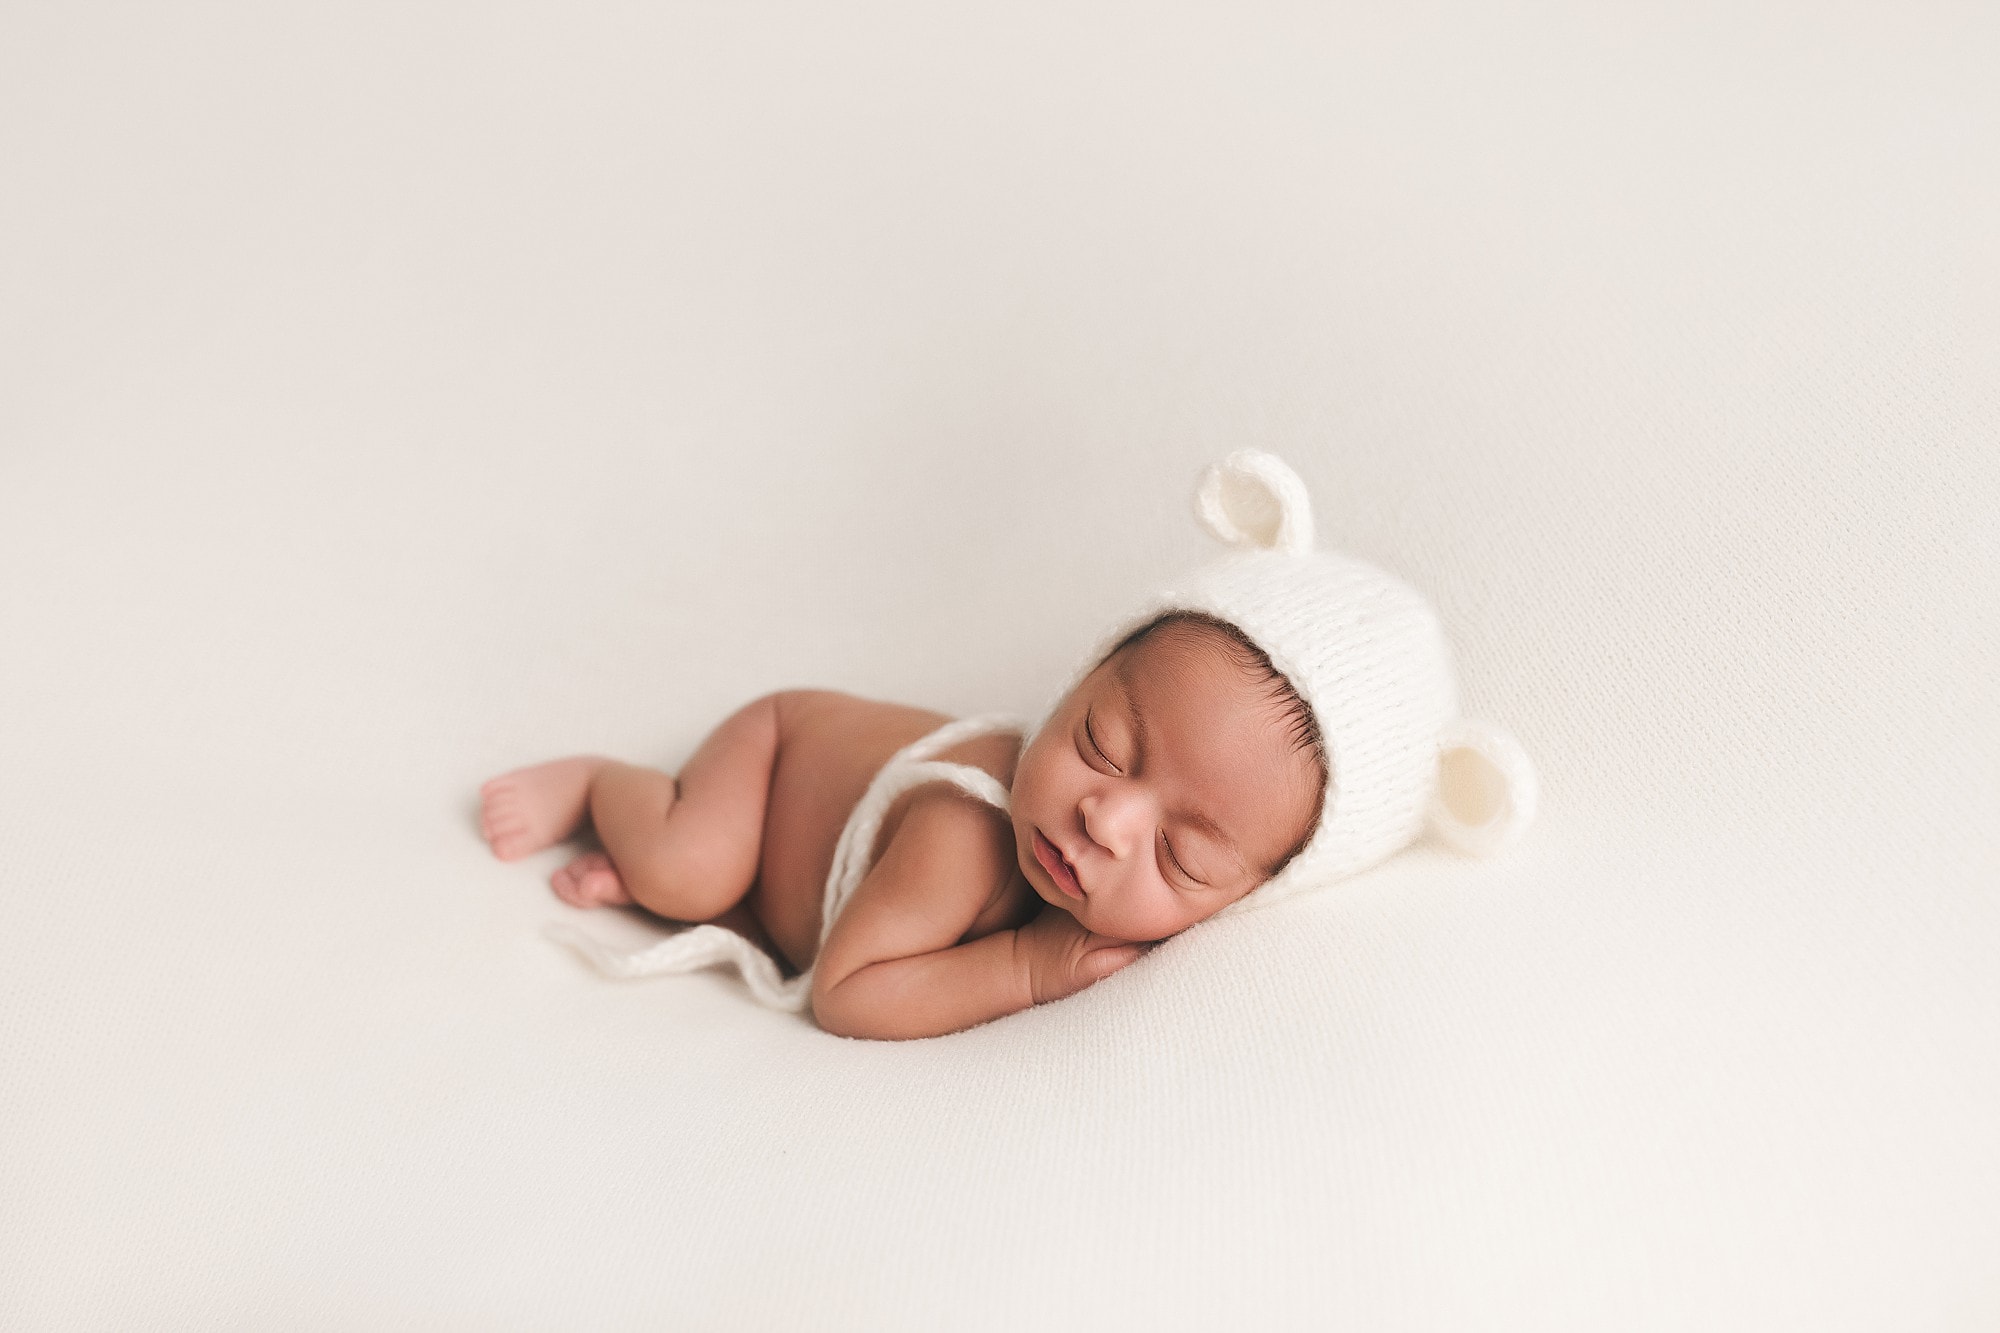 Classic Newborn Session with Family's Fifth Baby Girl!